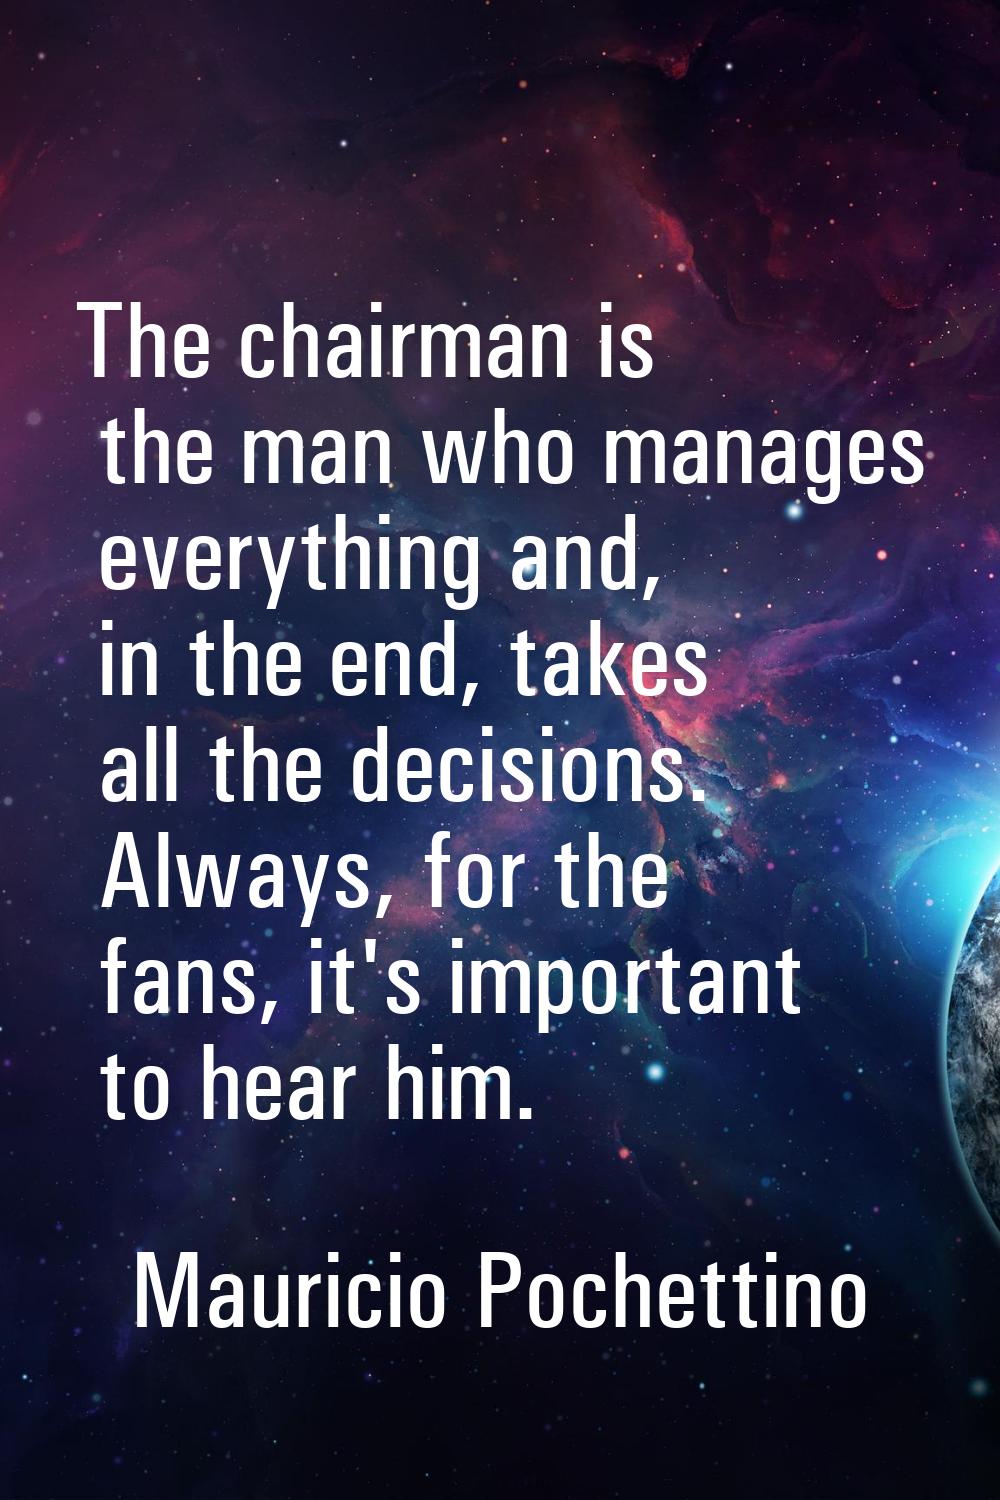 The chairman is the man who manages everything and, in the end, takes all the decisions. Always, fo